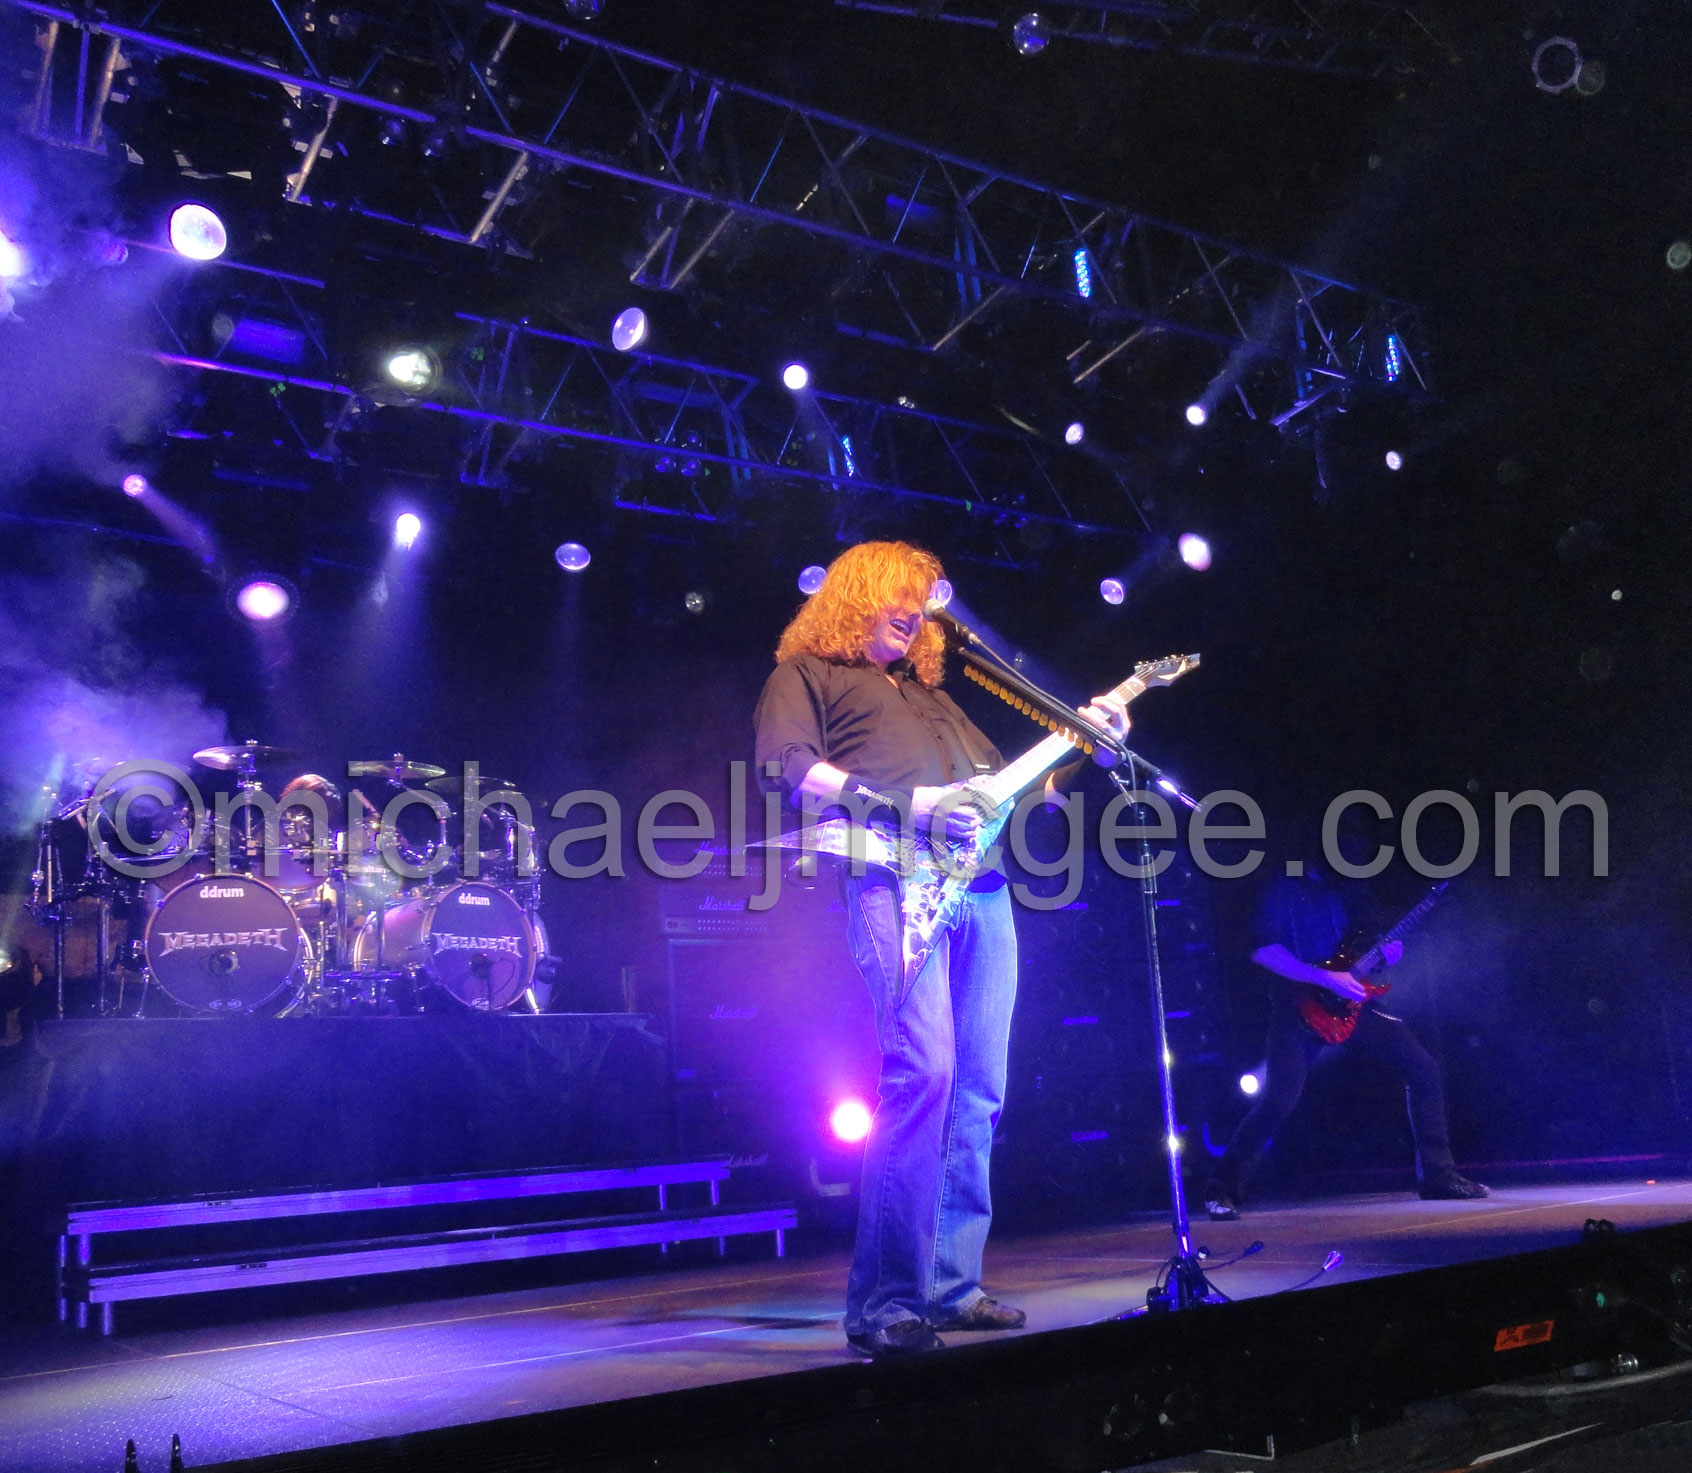 Dave Mustaine / michaeljmcgee.com